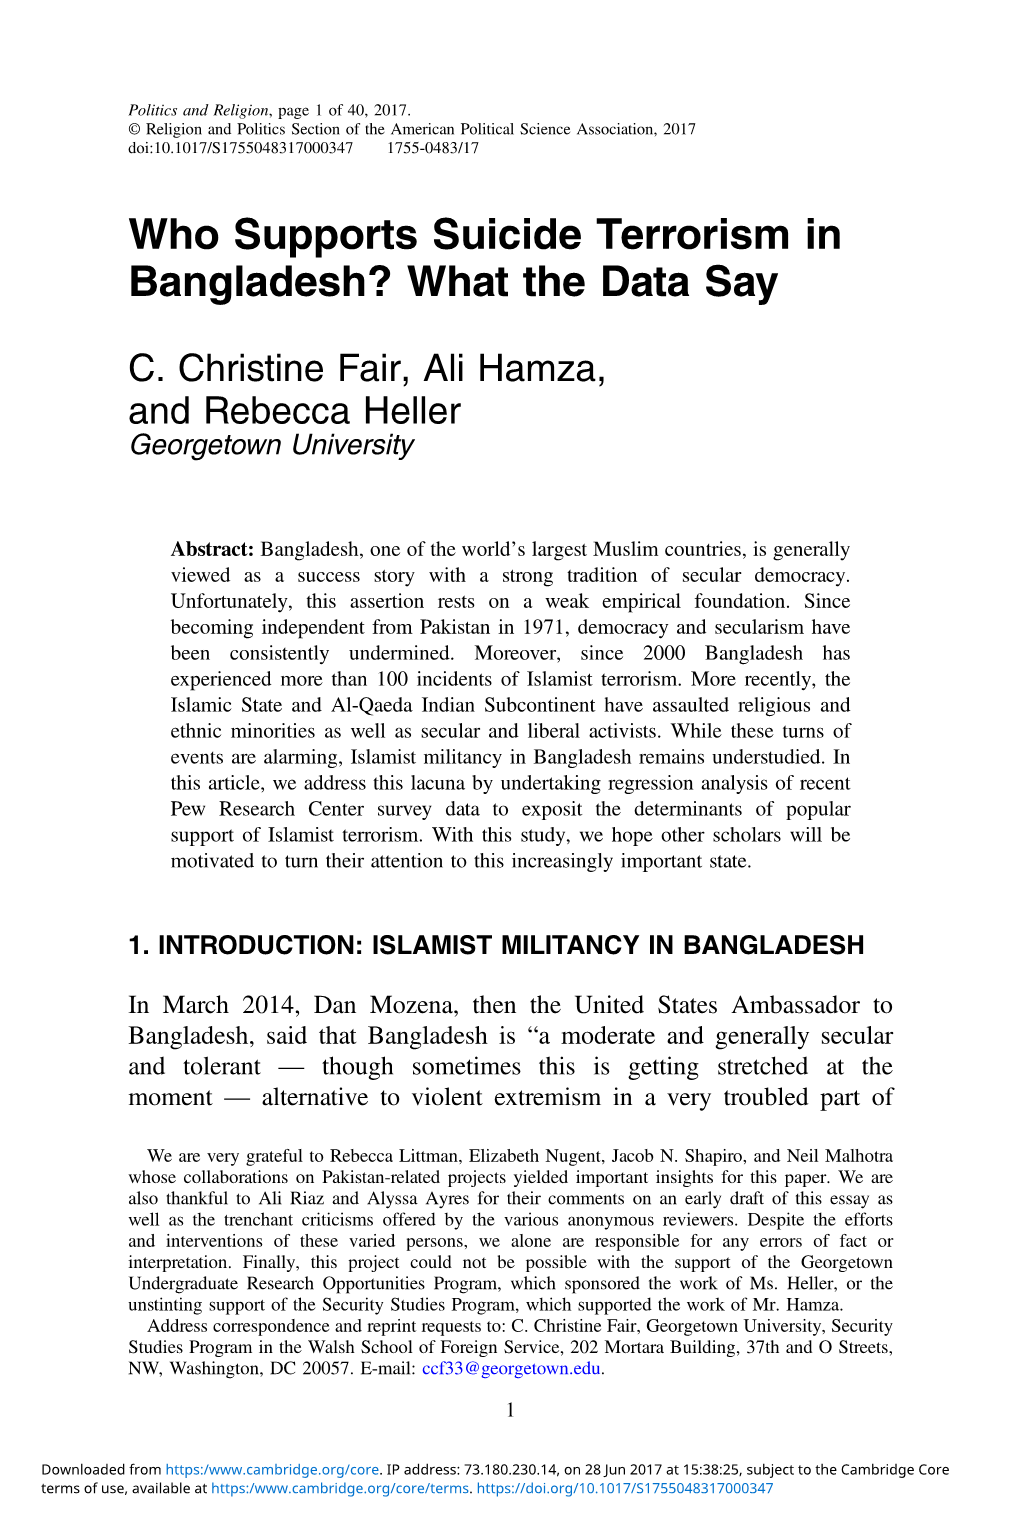 Who Supports Suicide Terrorism in Bangladesh? What the Data Say